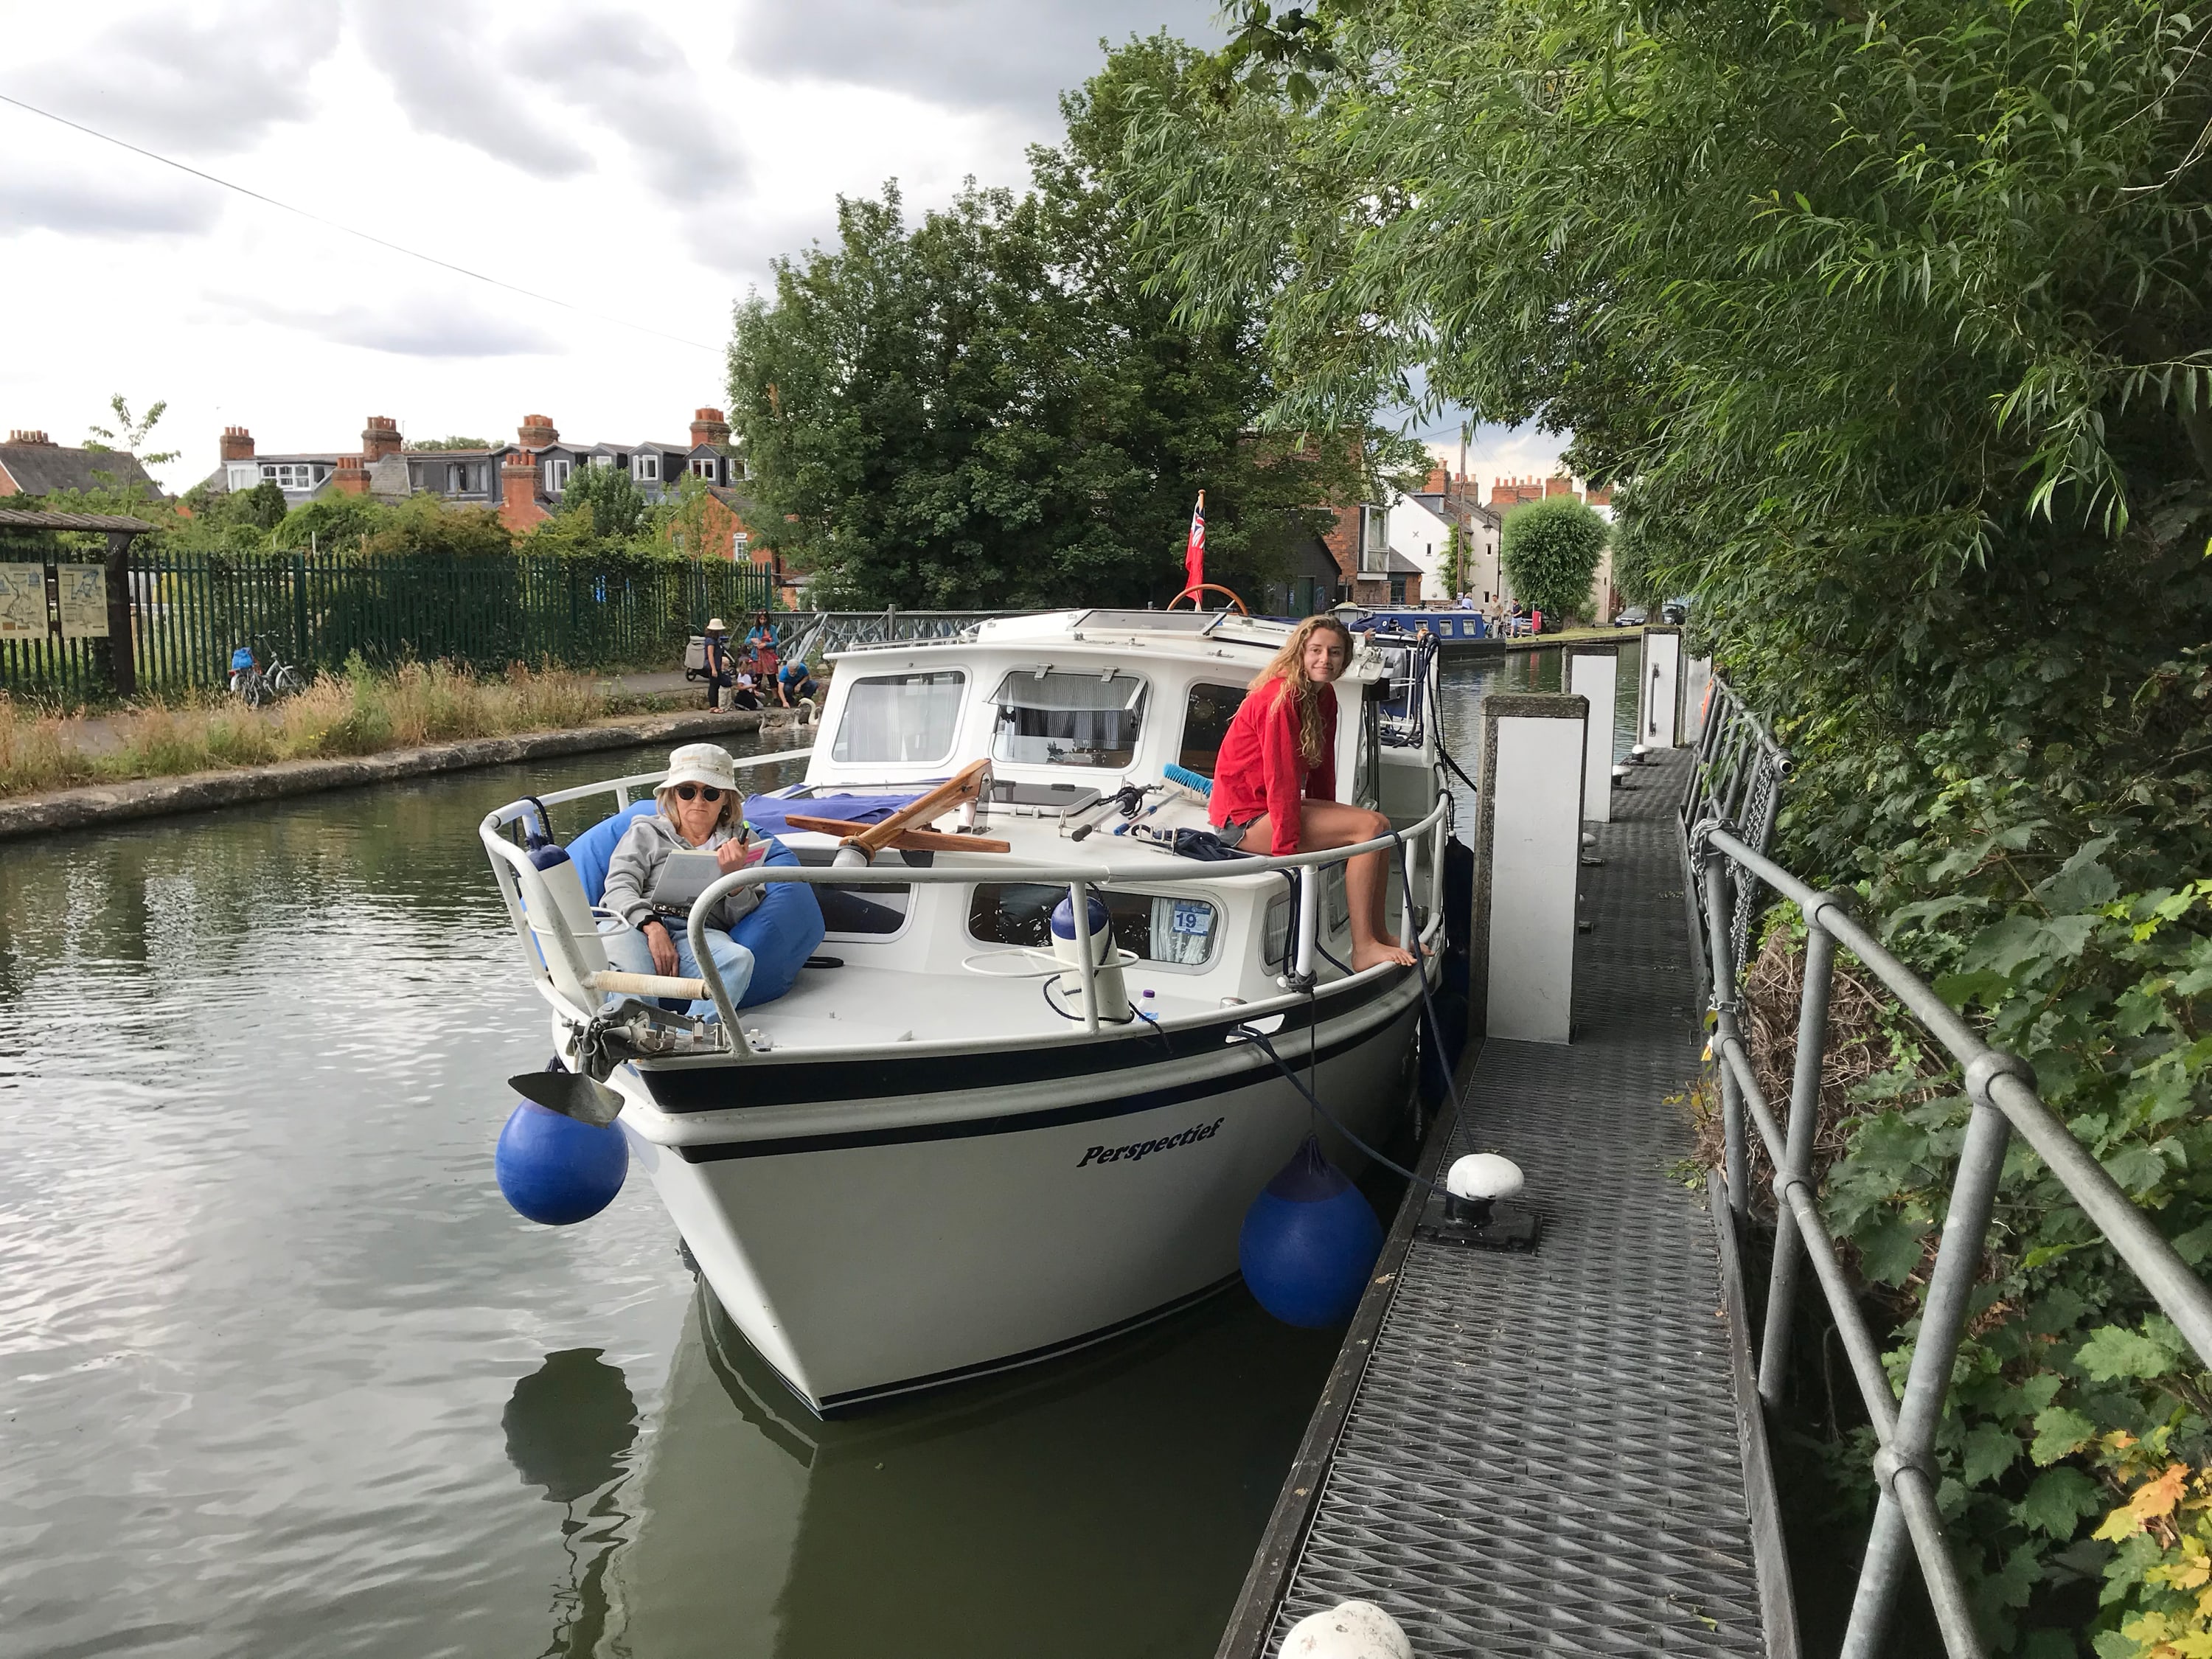 Back at Osney Lock with a relaxed crew